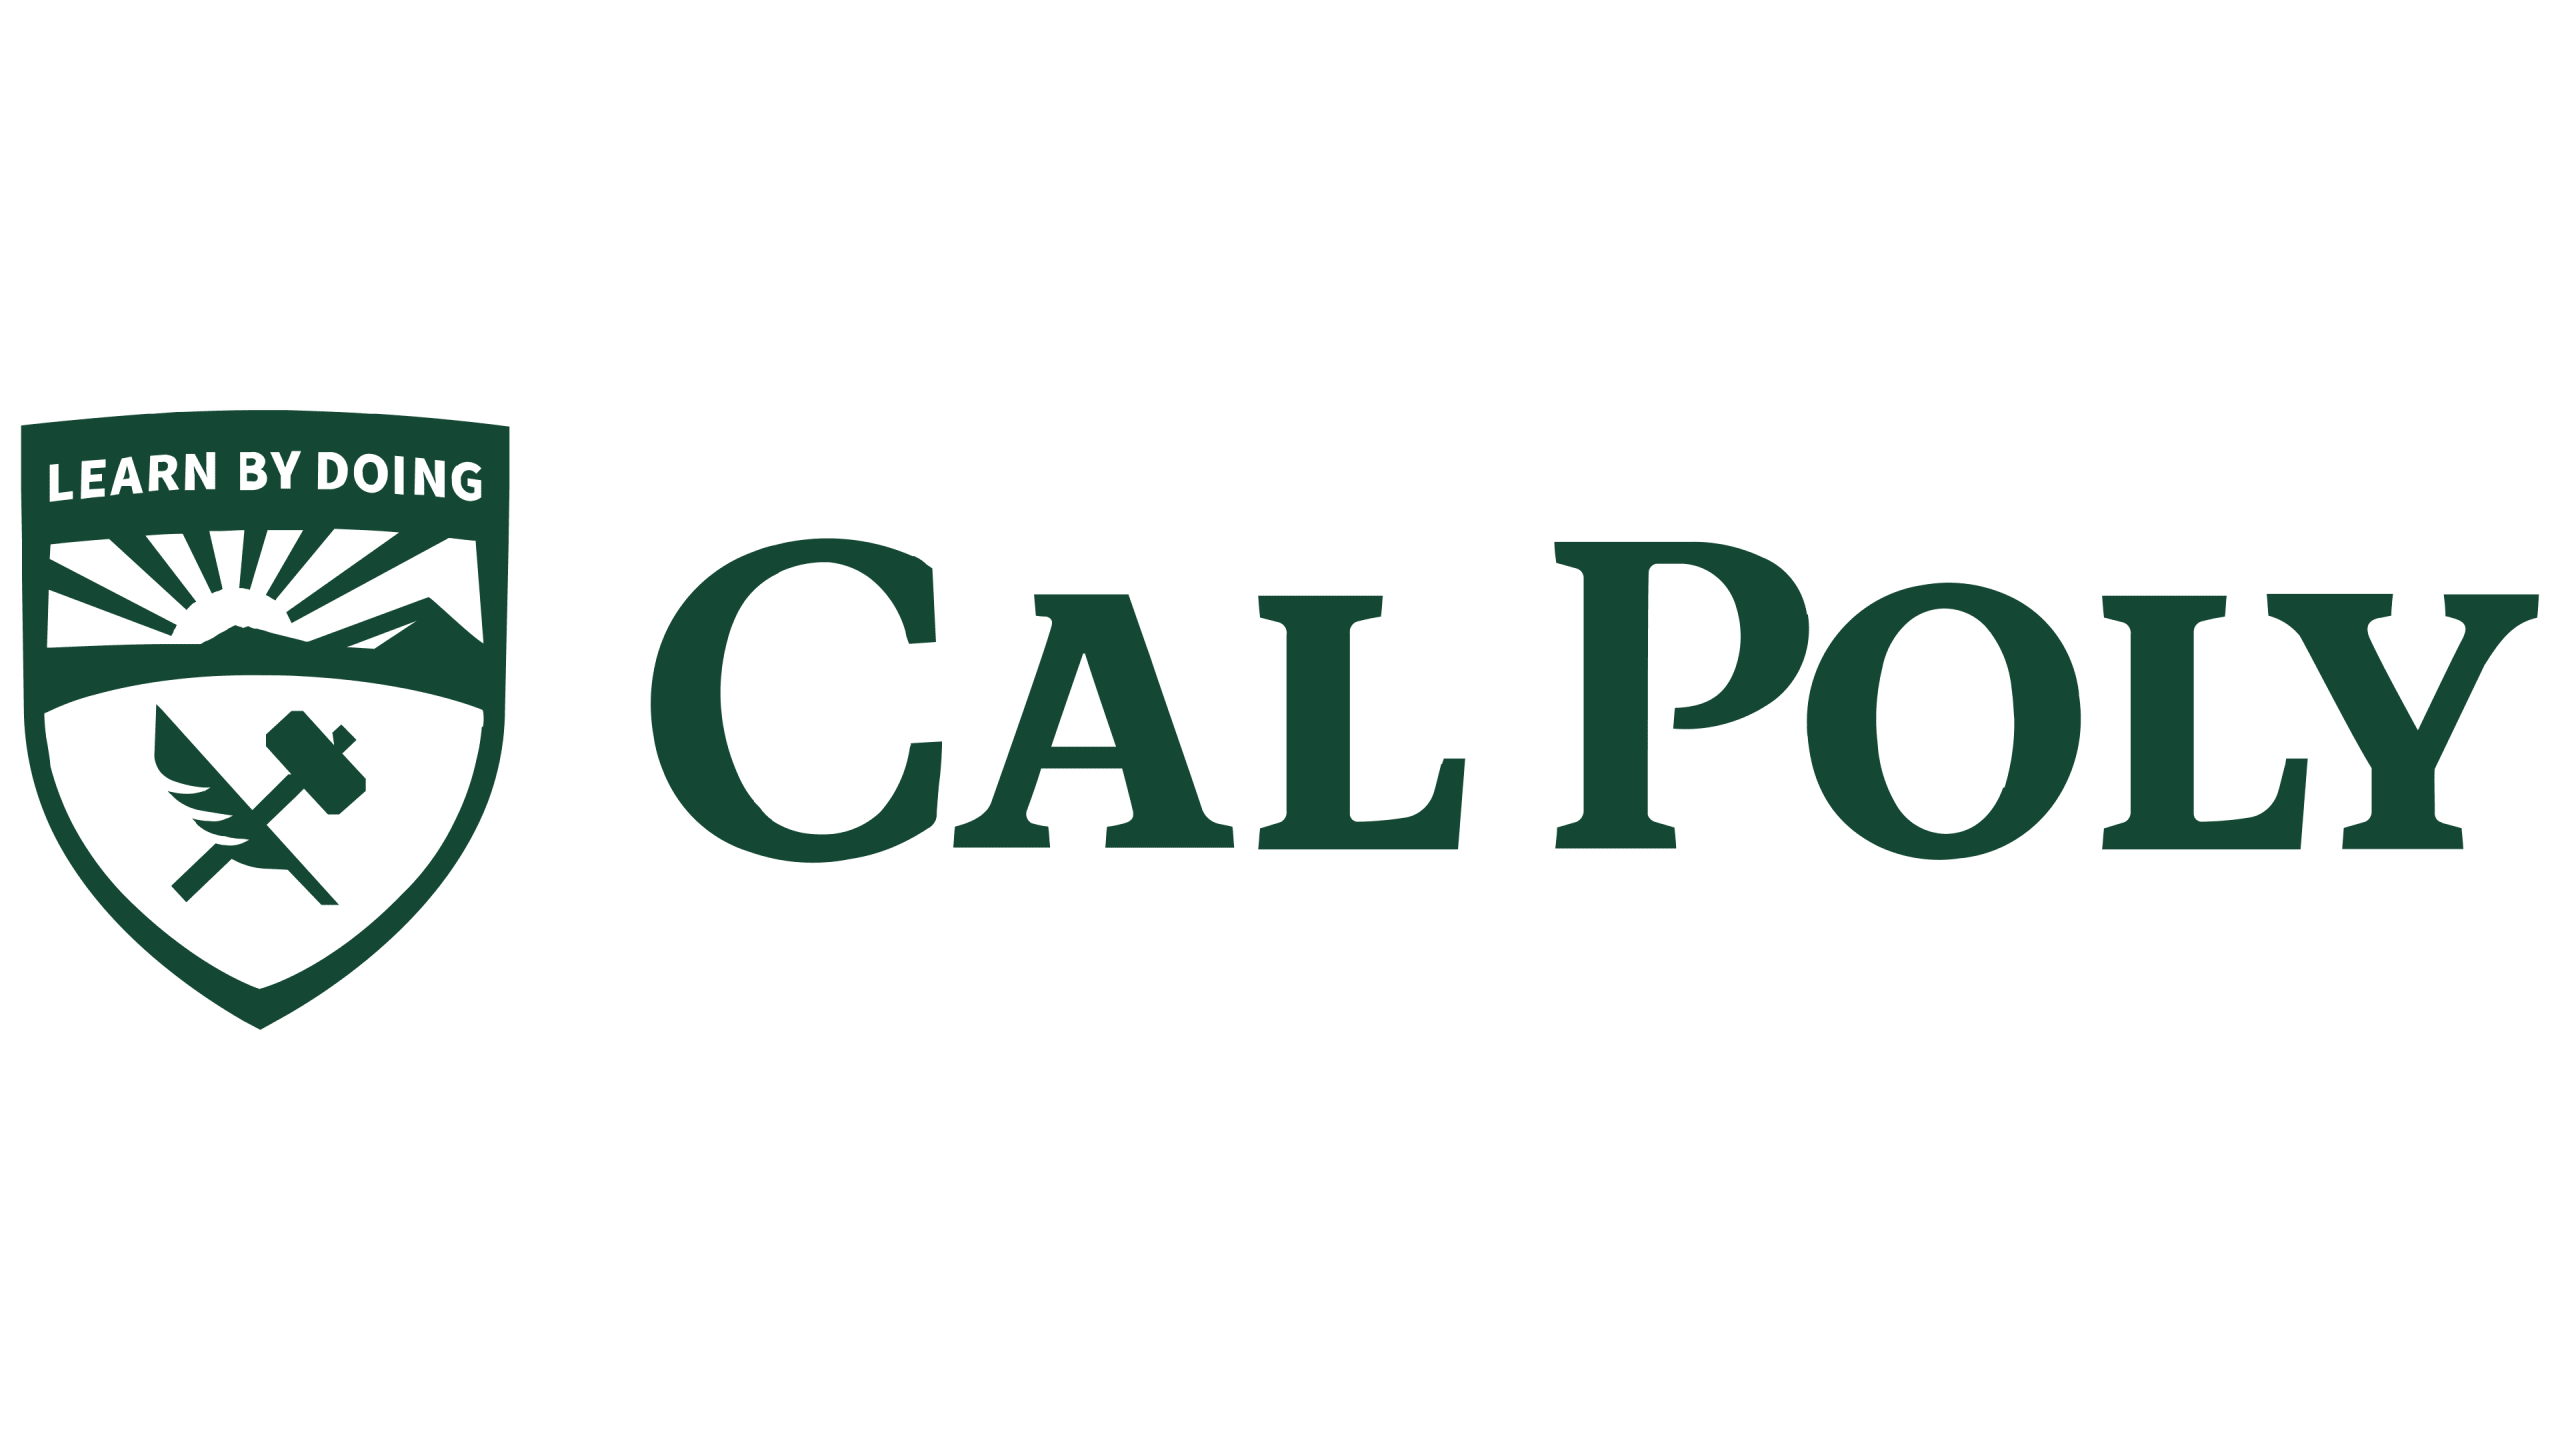 Cal State Polytechnic